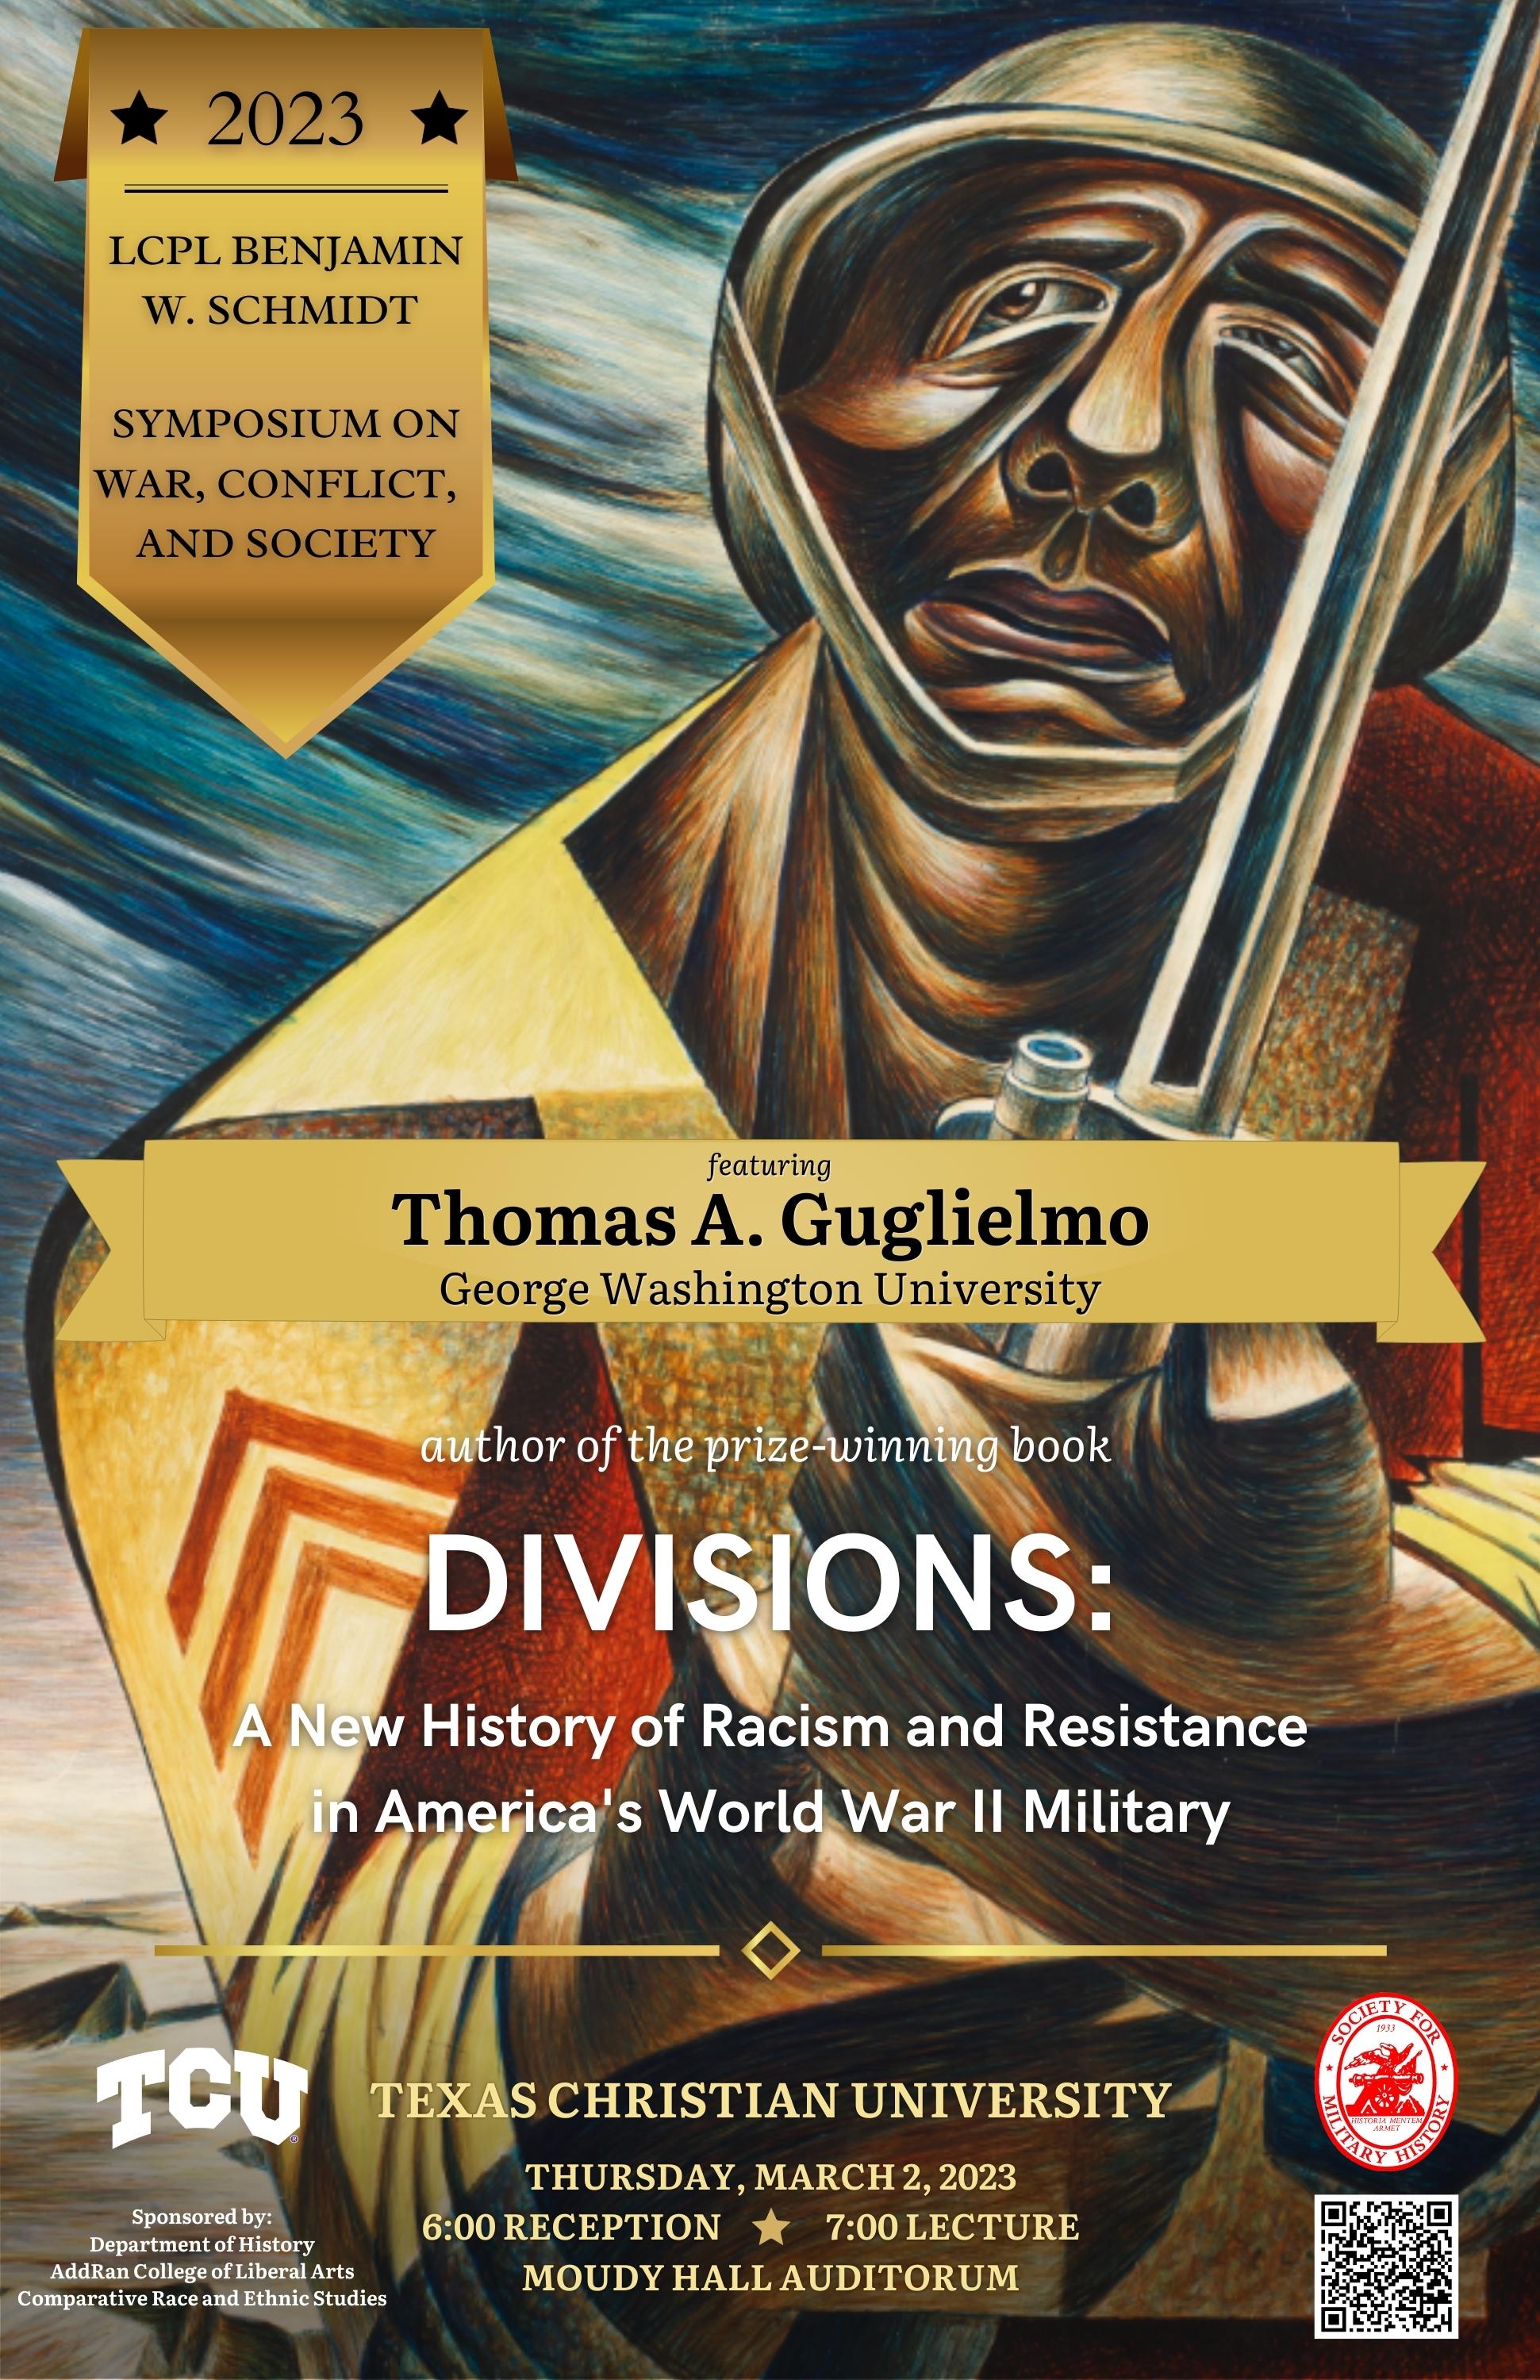 flyer about 2023 symposium lecture by thomas gulielmo about his book division: race and racism in world war 2